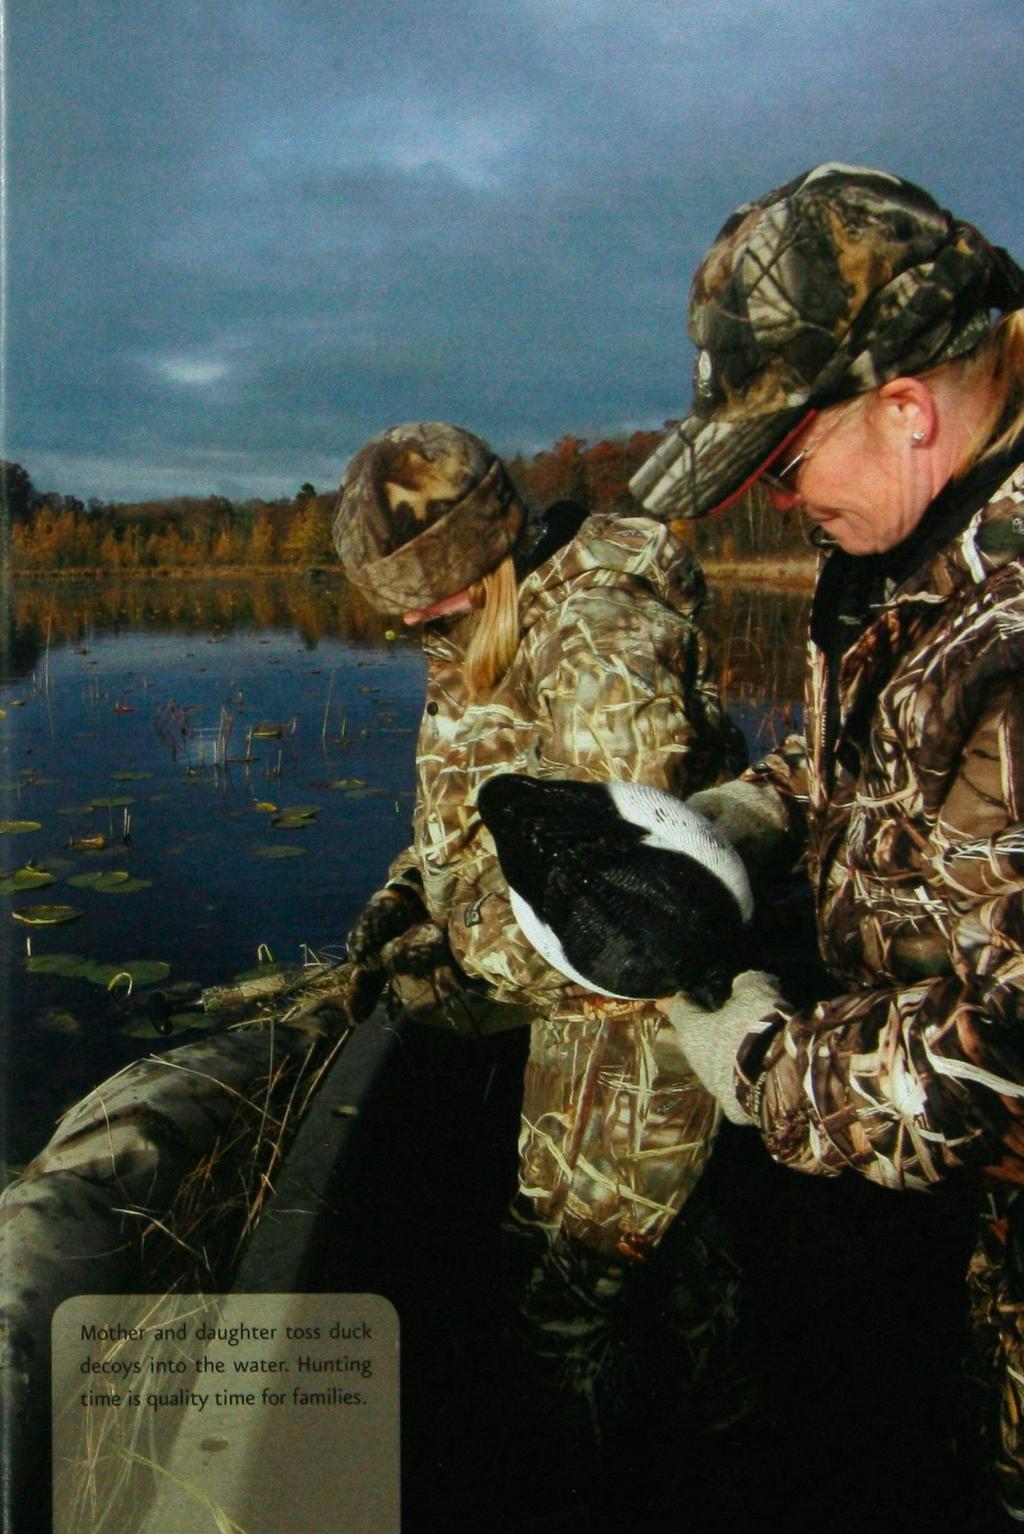 Mother and cfeughter toss duck decoys into the